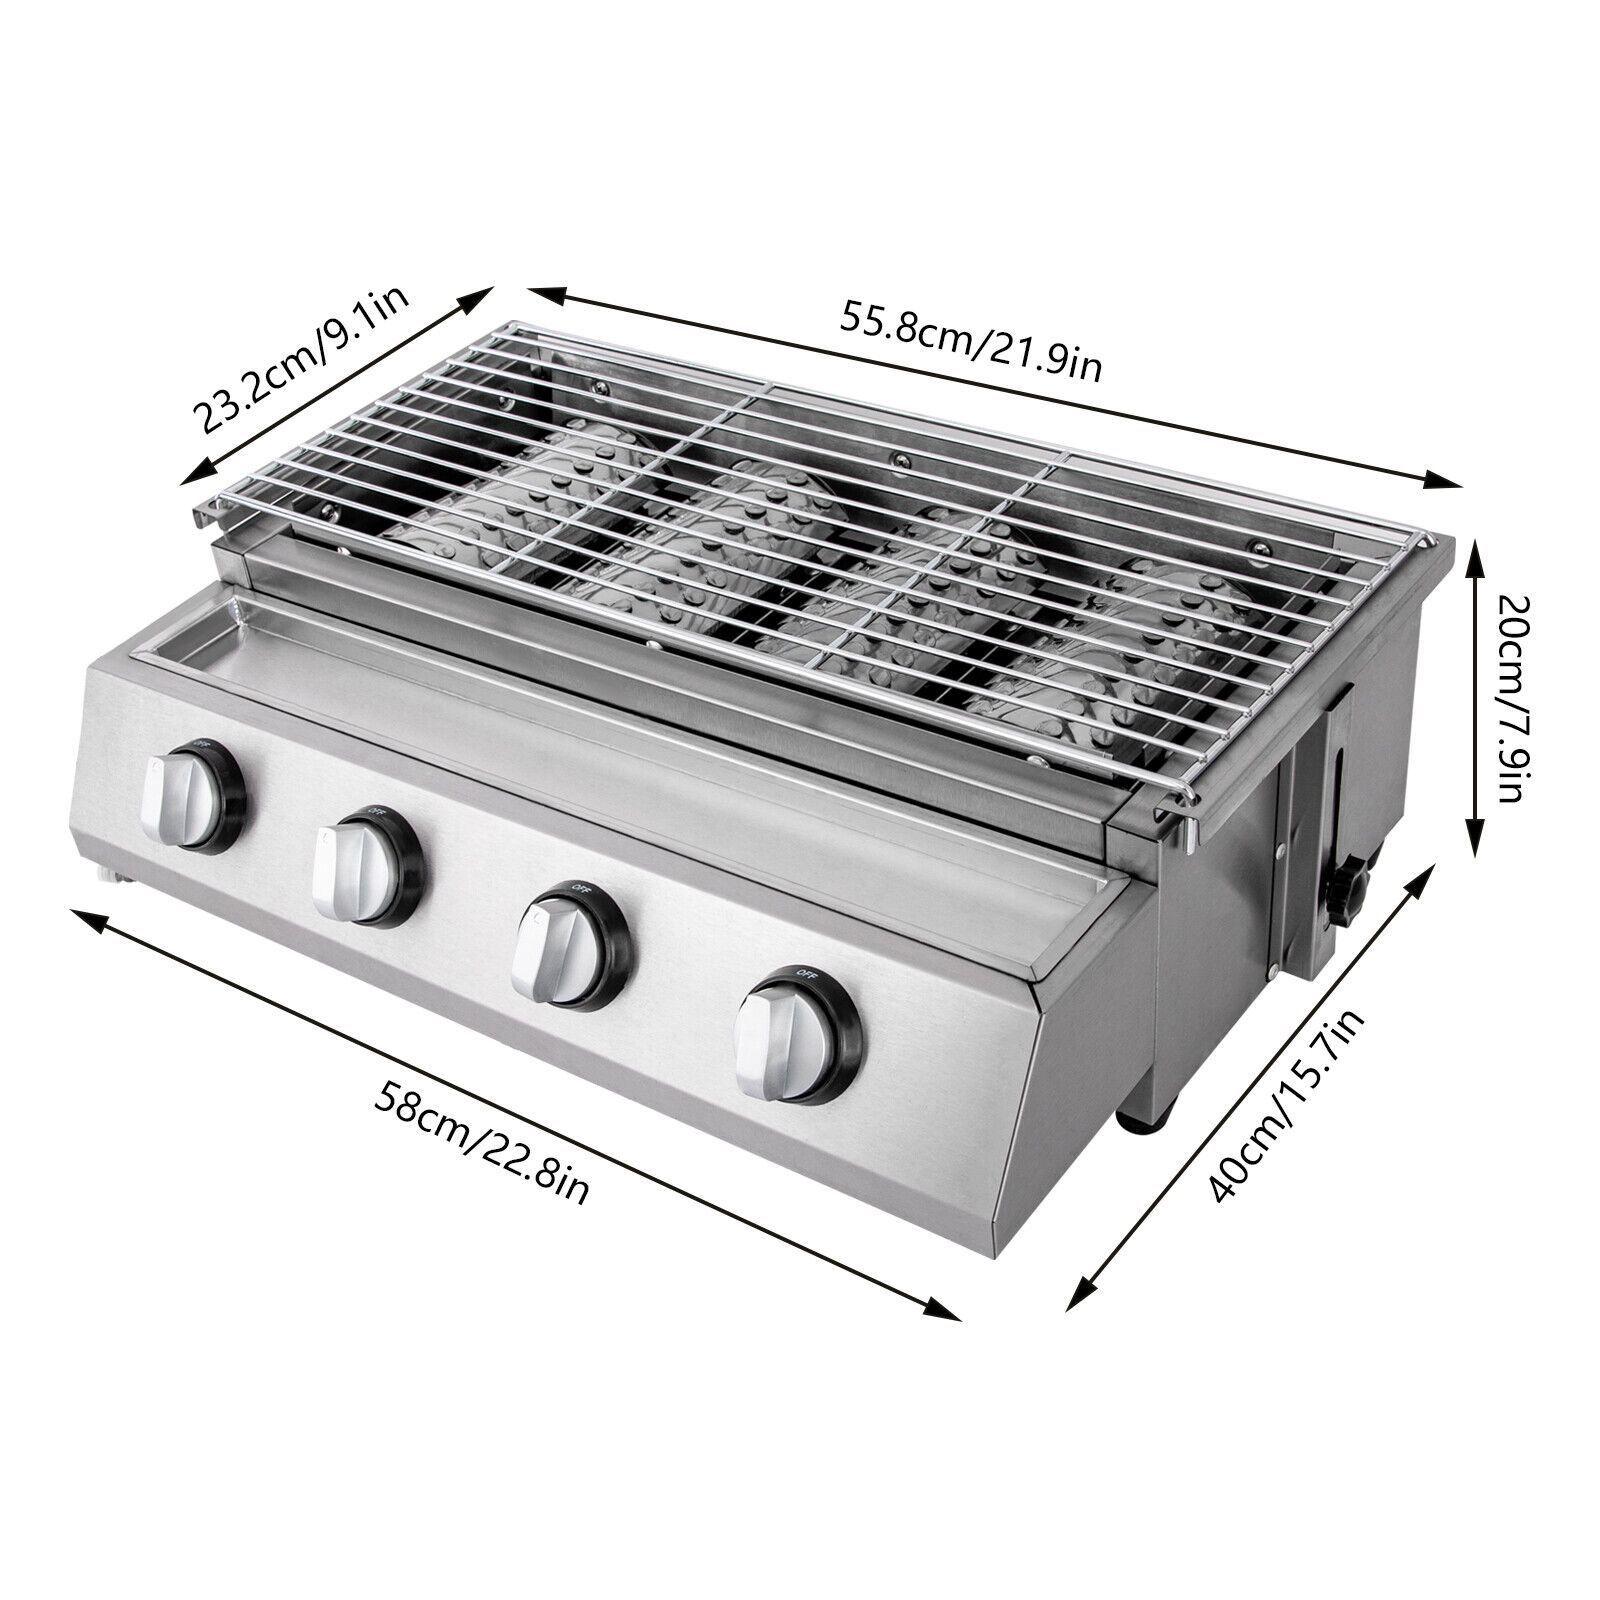 Miumaeov 4-Burner BBQ Propane Gas Grill 21.9 Inch Stainless Steel Barbecue Camping Grill Portable Small Propane Grill Detachable BBQ Gas Grill Griddle Silver Patio Smokeless Grill with Steel Hood - image 2 of 12